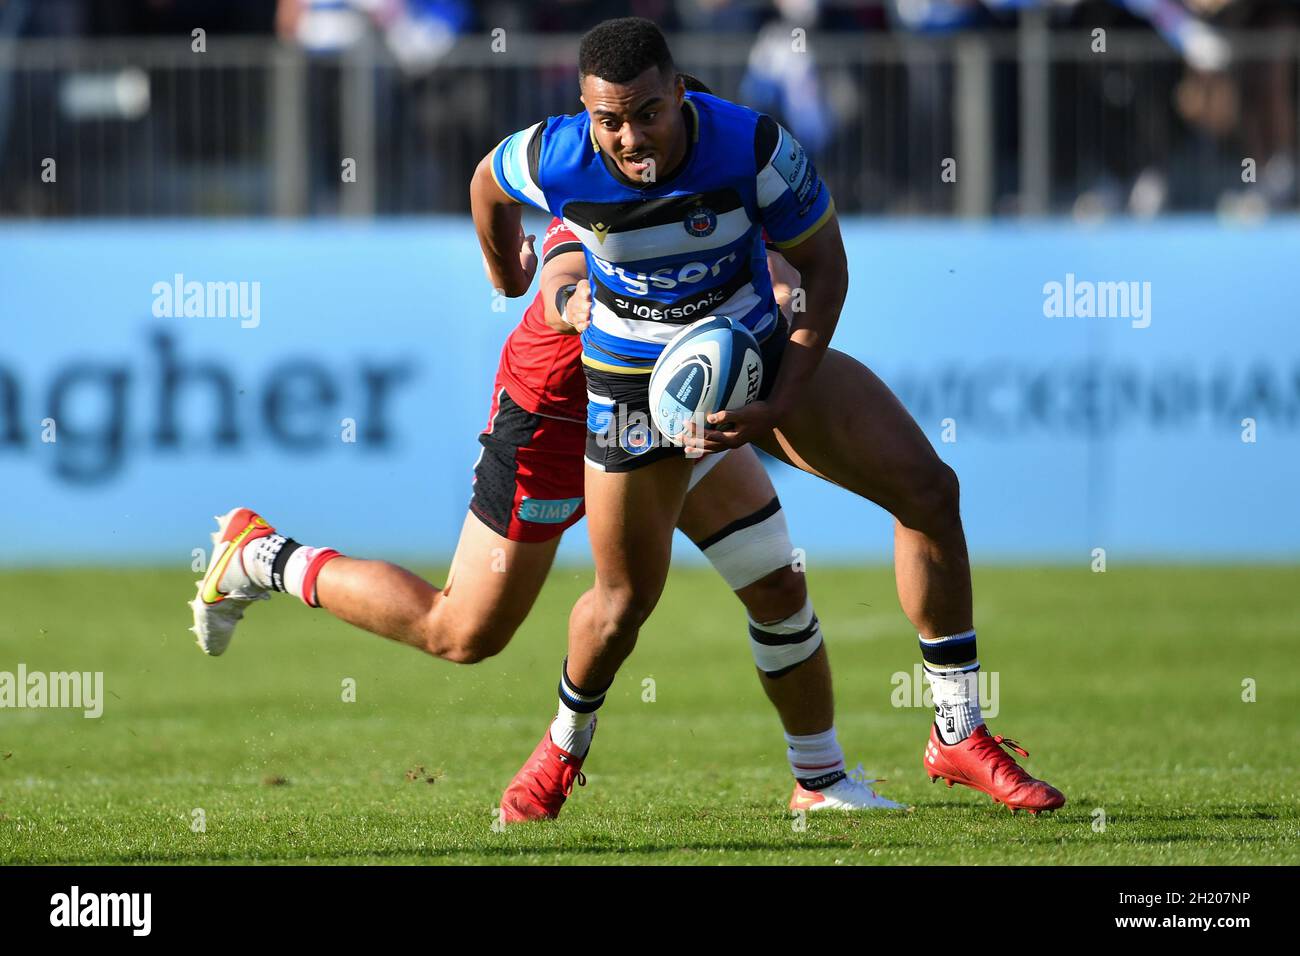 The Recreation Ground, Bath, England, UK. 17th October, 2021. Bath Rugby's Max Ojomoh in action during the Gallagher English Premiership match between Bath Rugby and Saracens: Credit: Ashley Western/Alamy Live News Stock Photo